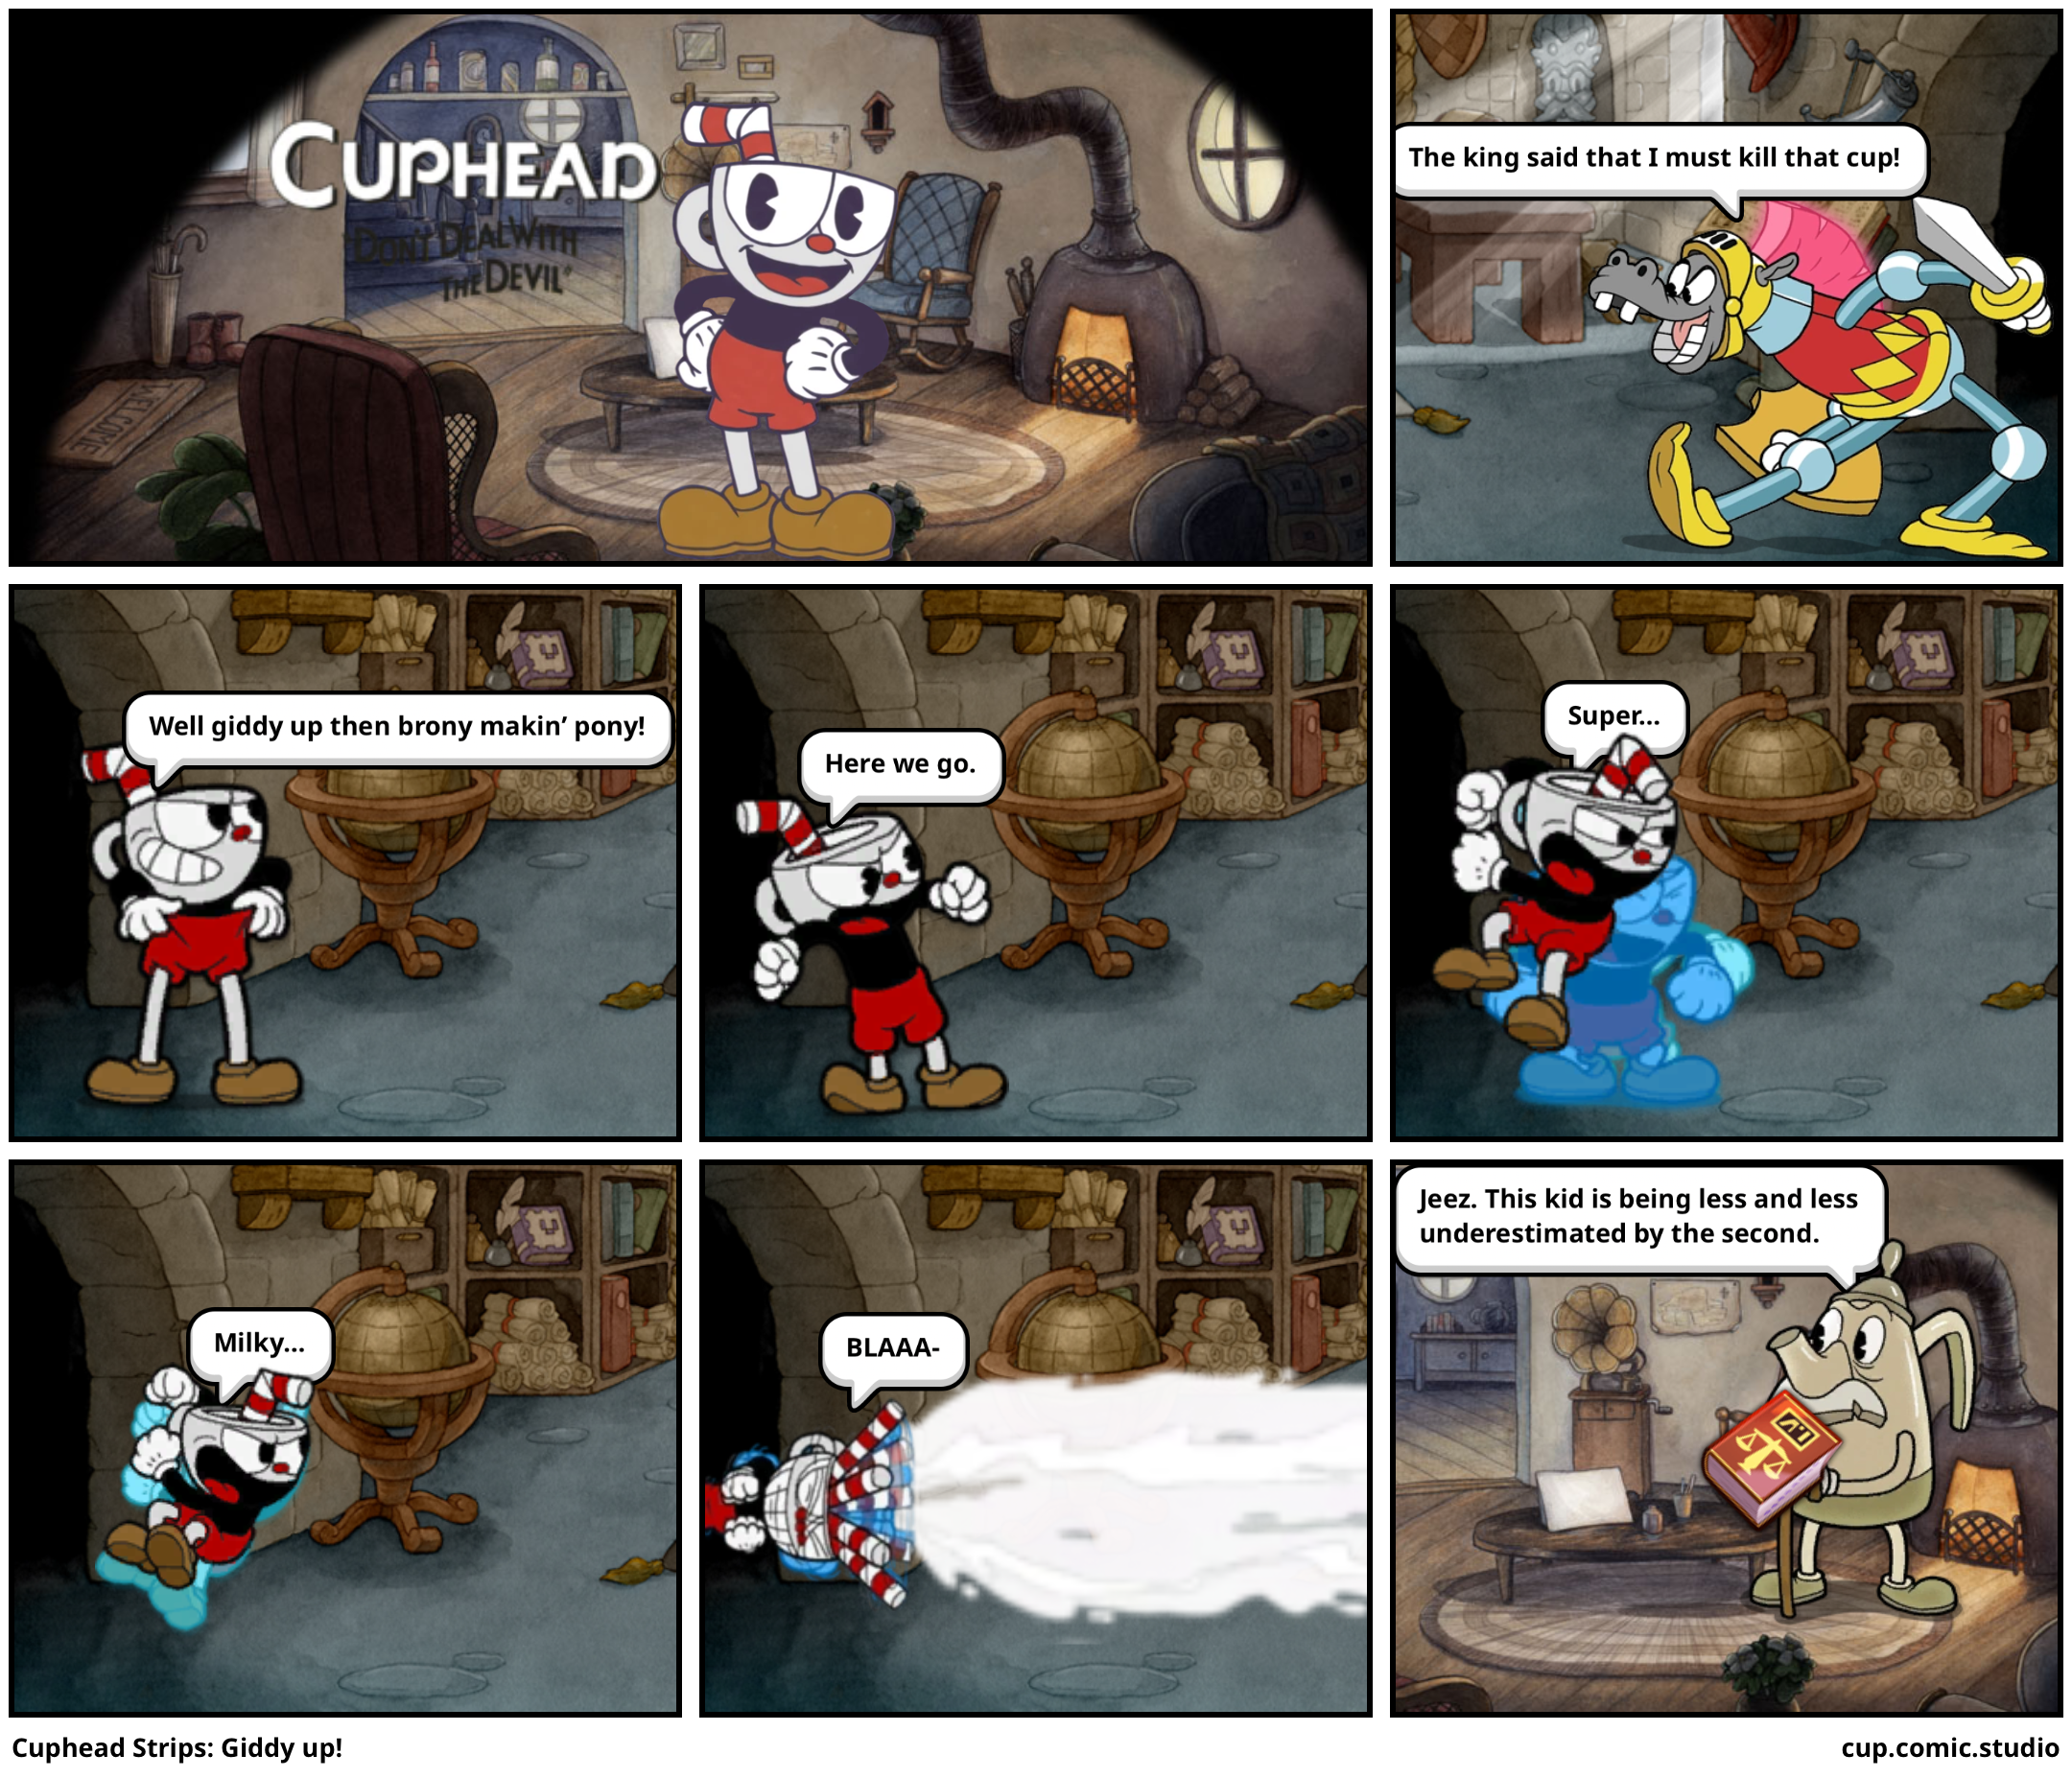 Cuphead Strips: Giddy up!